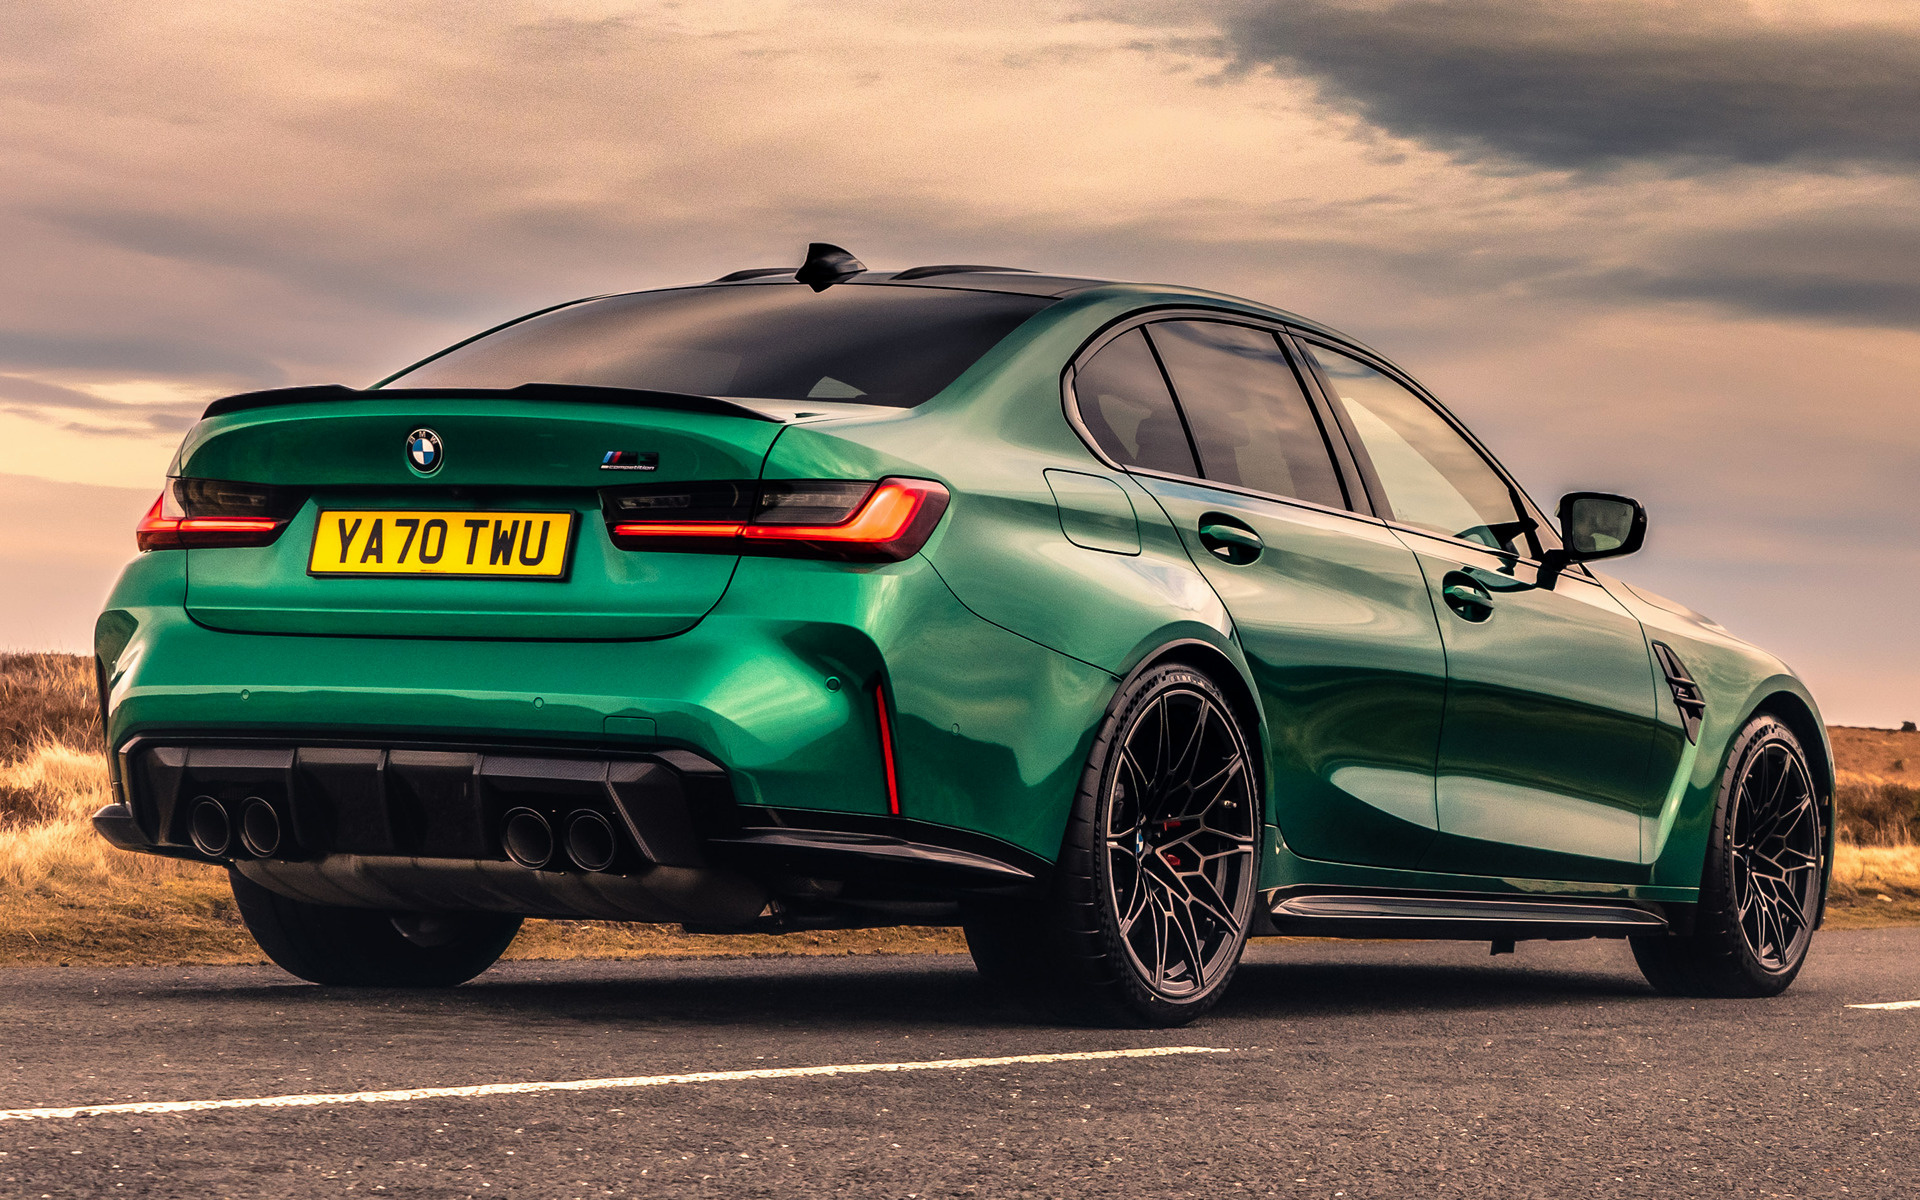 2021 BMW M3 Competition, UK model, Wallpaper collection, High-resolution images, 1920x1200 HD Desktop